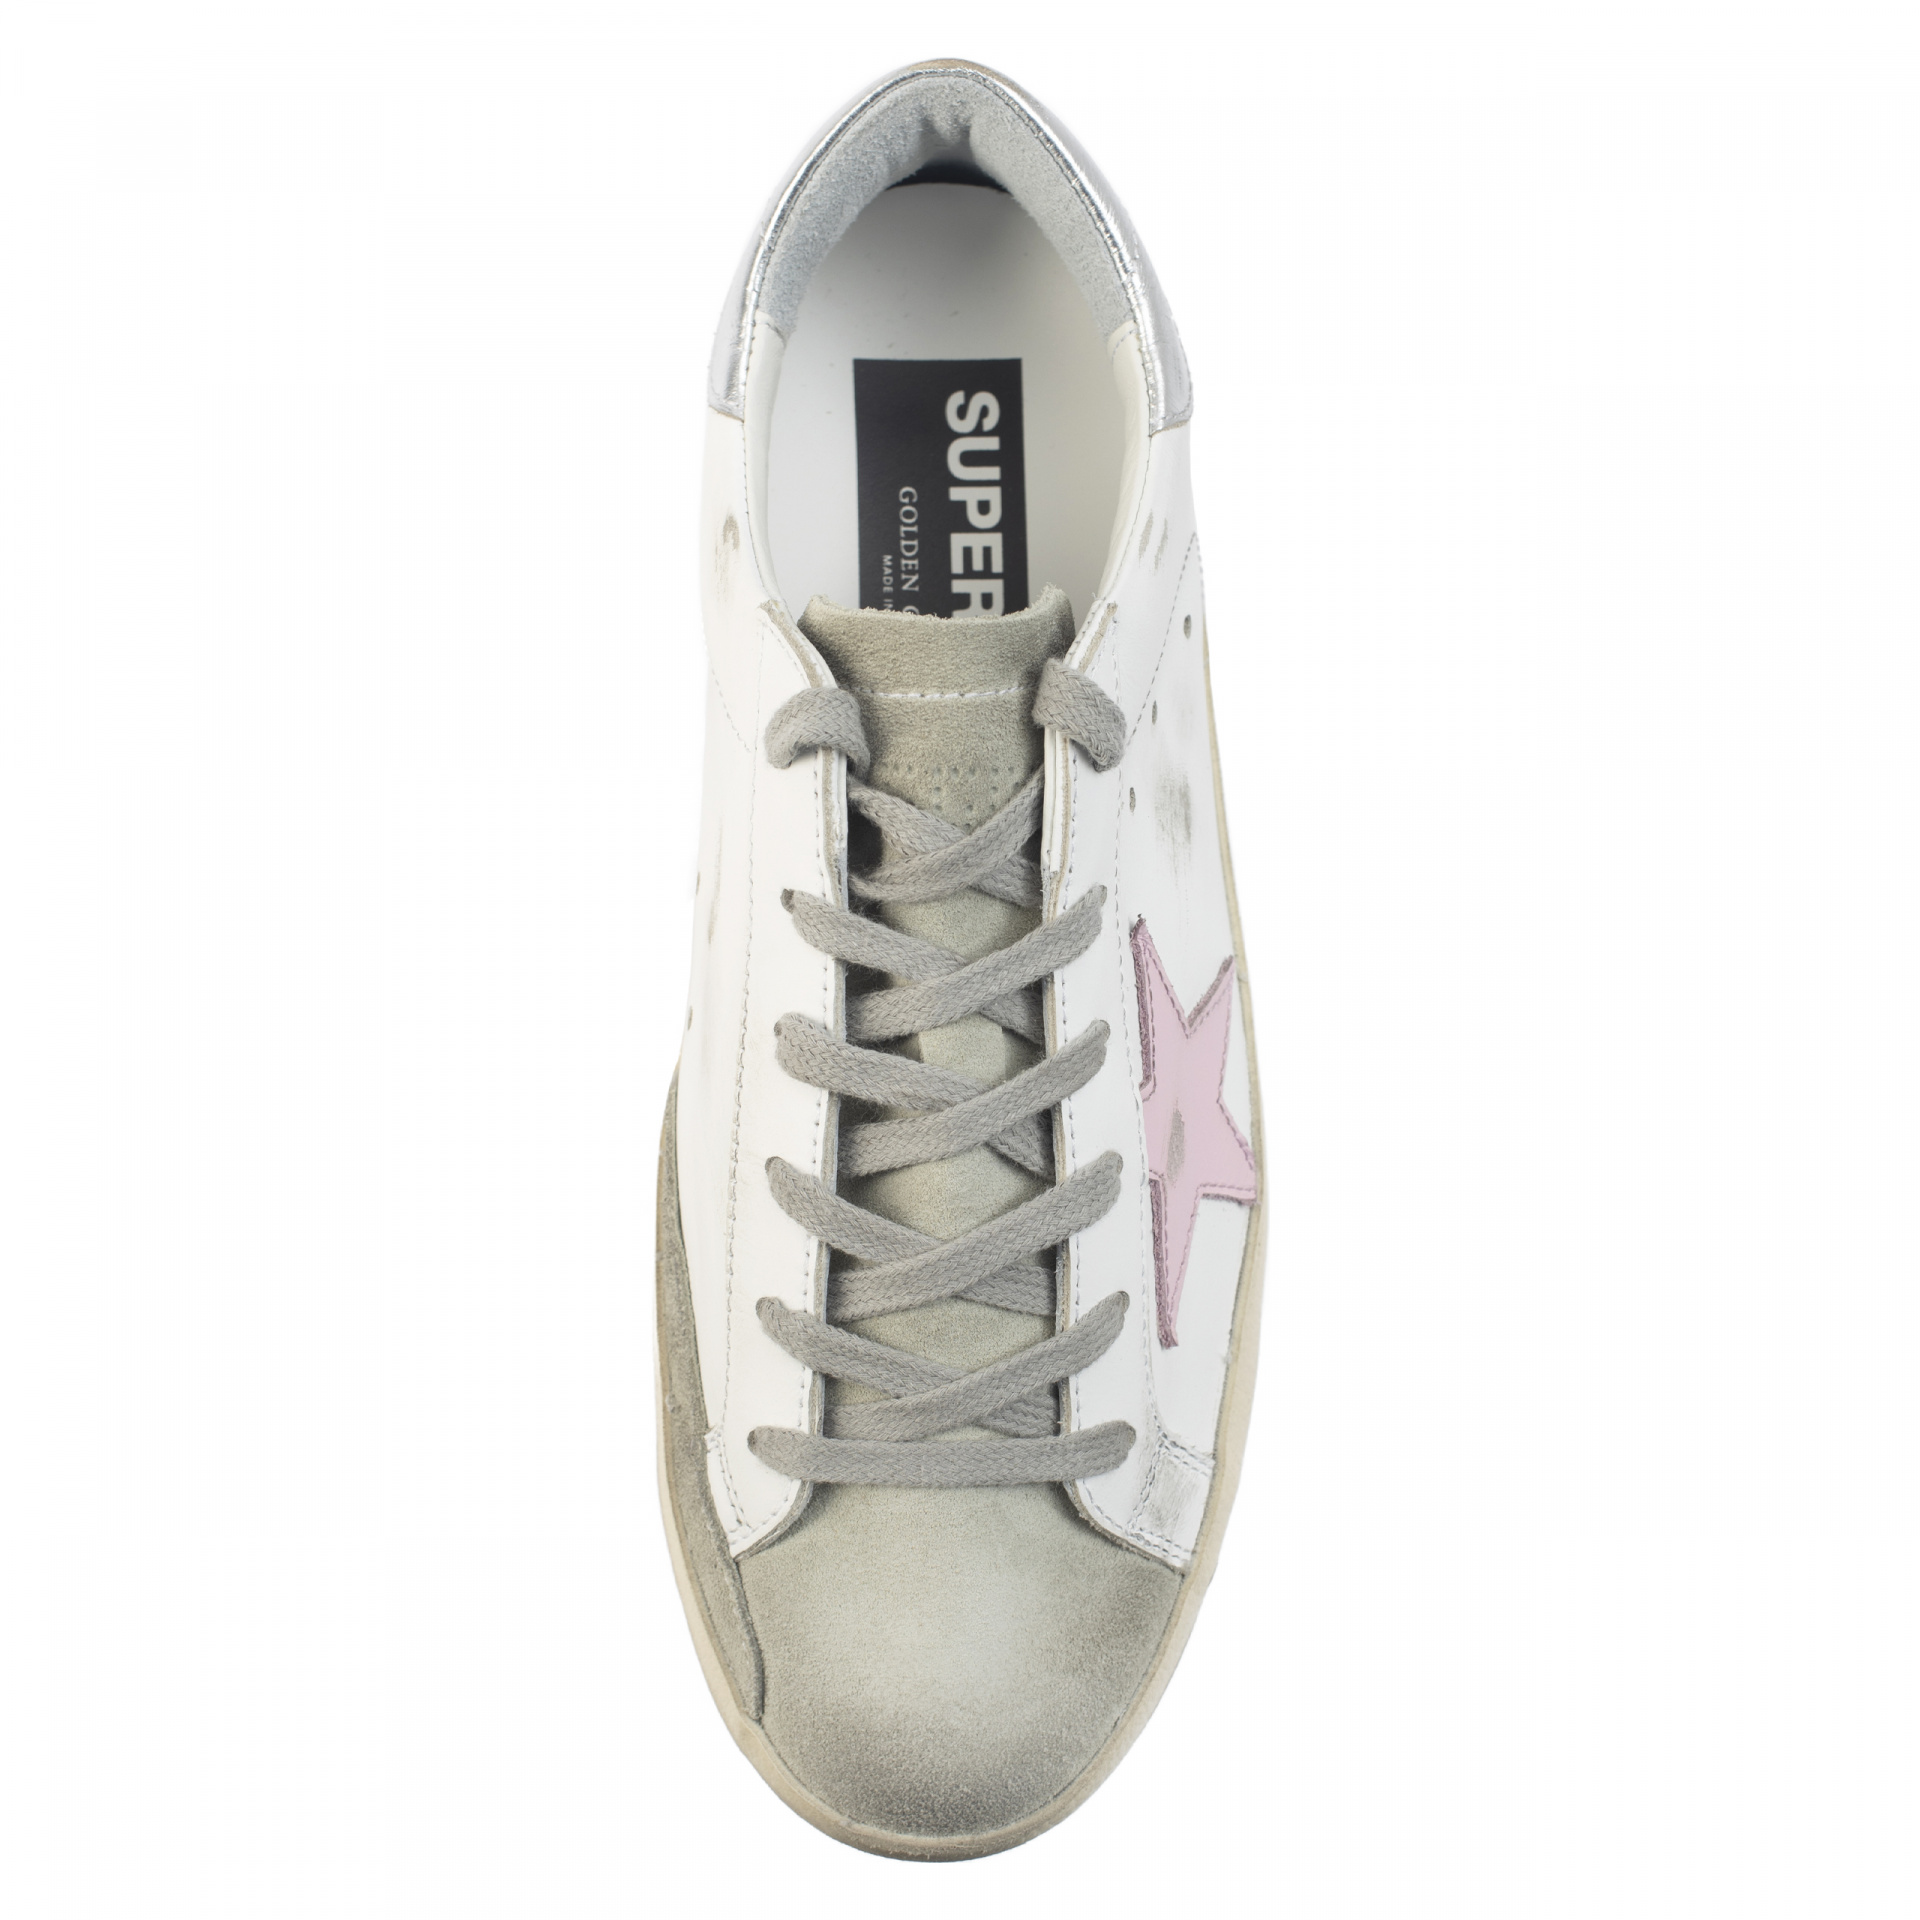 Golden Goose Superstar Leather sneakers with pink star